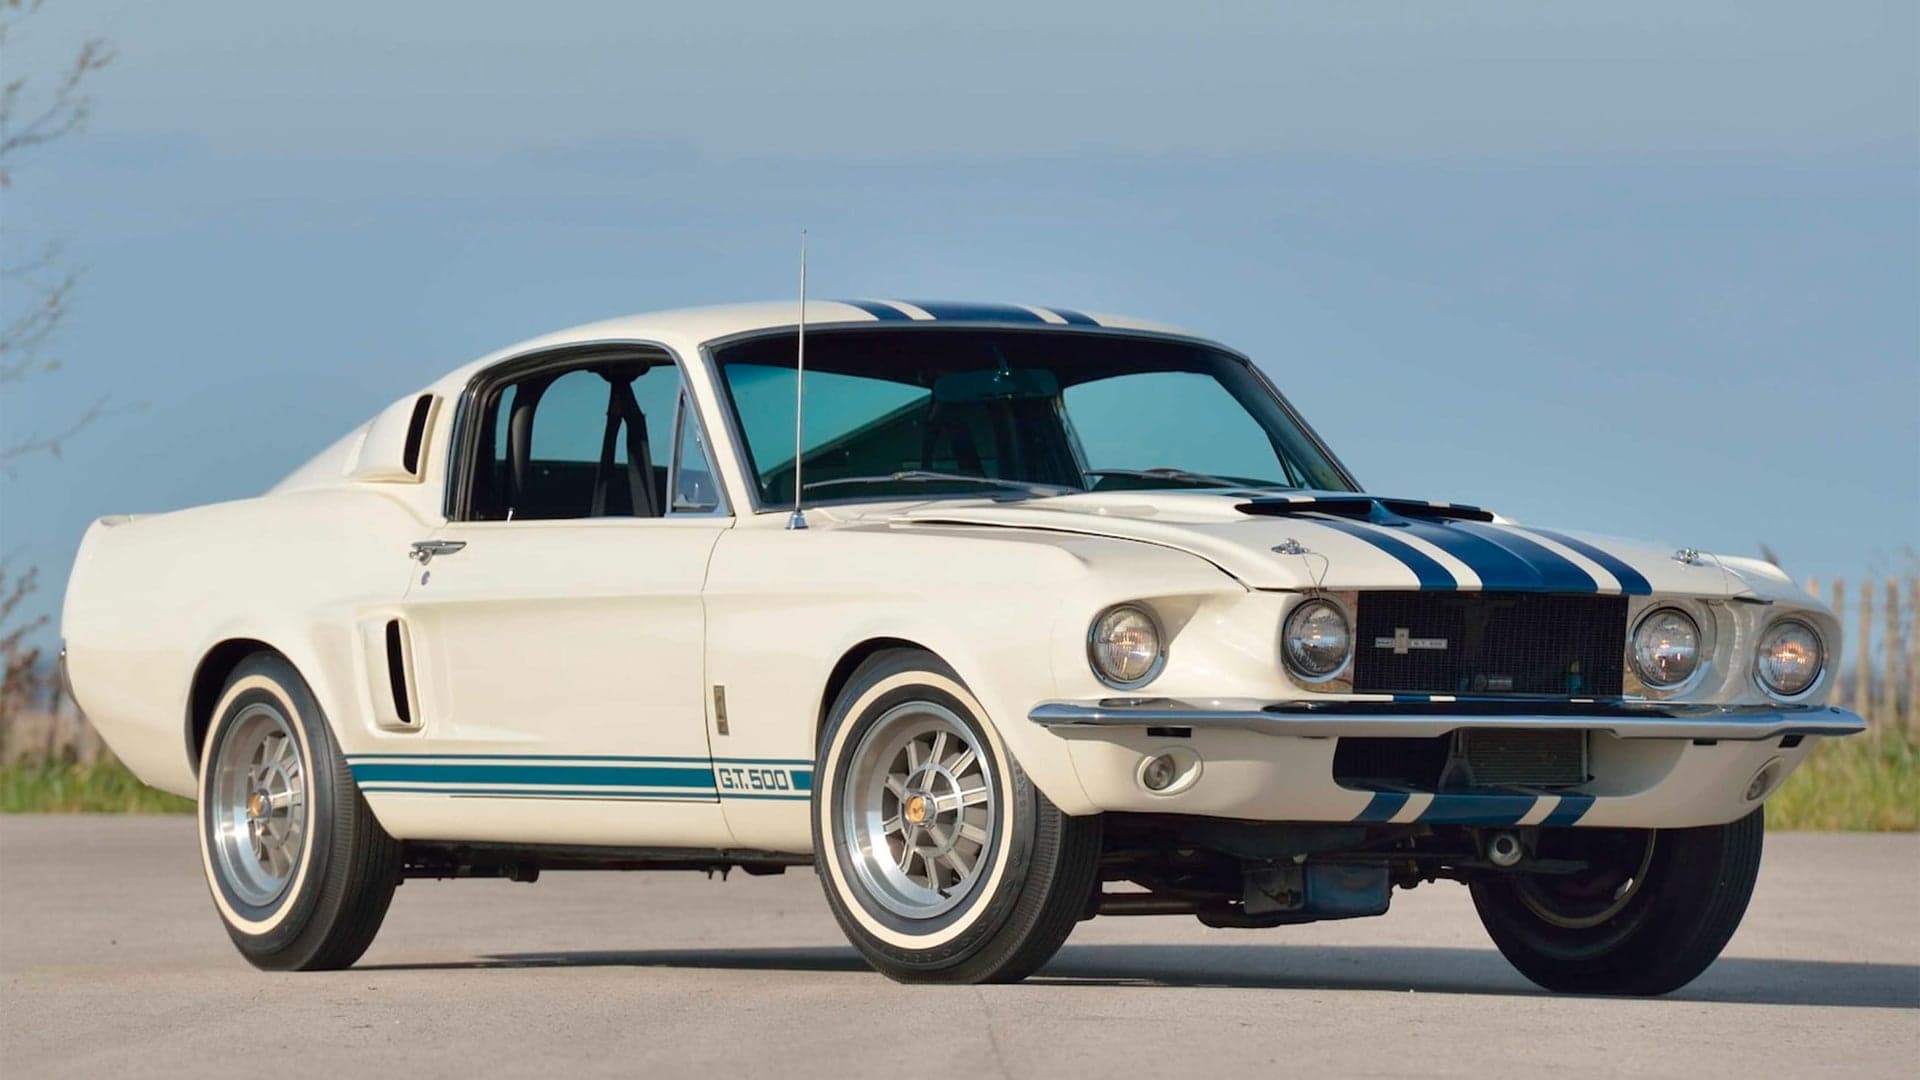 $2.2 Million 1967 Shelby GT500 Super Snake Sets Record as Most Expensive Ford Mustang Ever